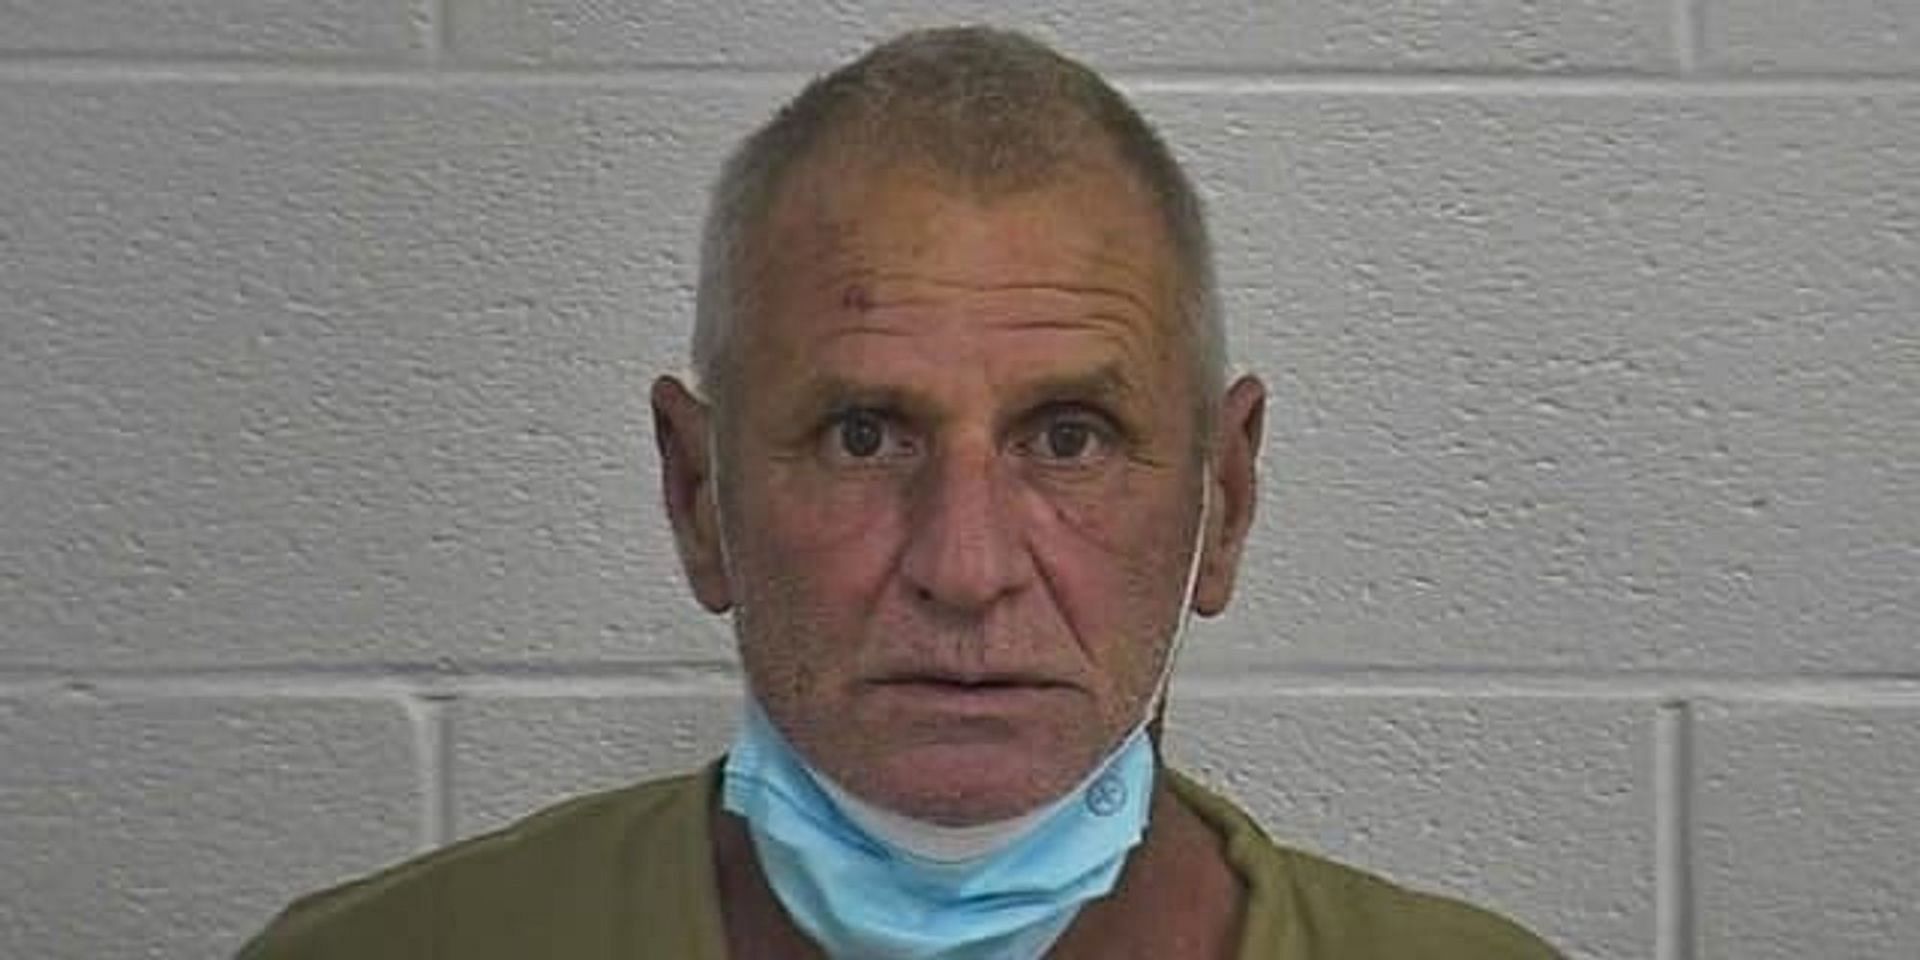 61-year-old kidnapper arrested and faces kidnapping and child p**nography charges (Image via Laurel County Sheriff)